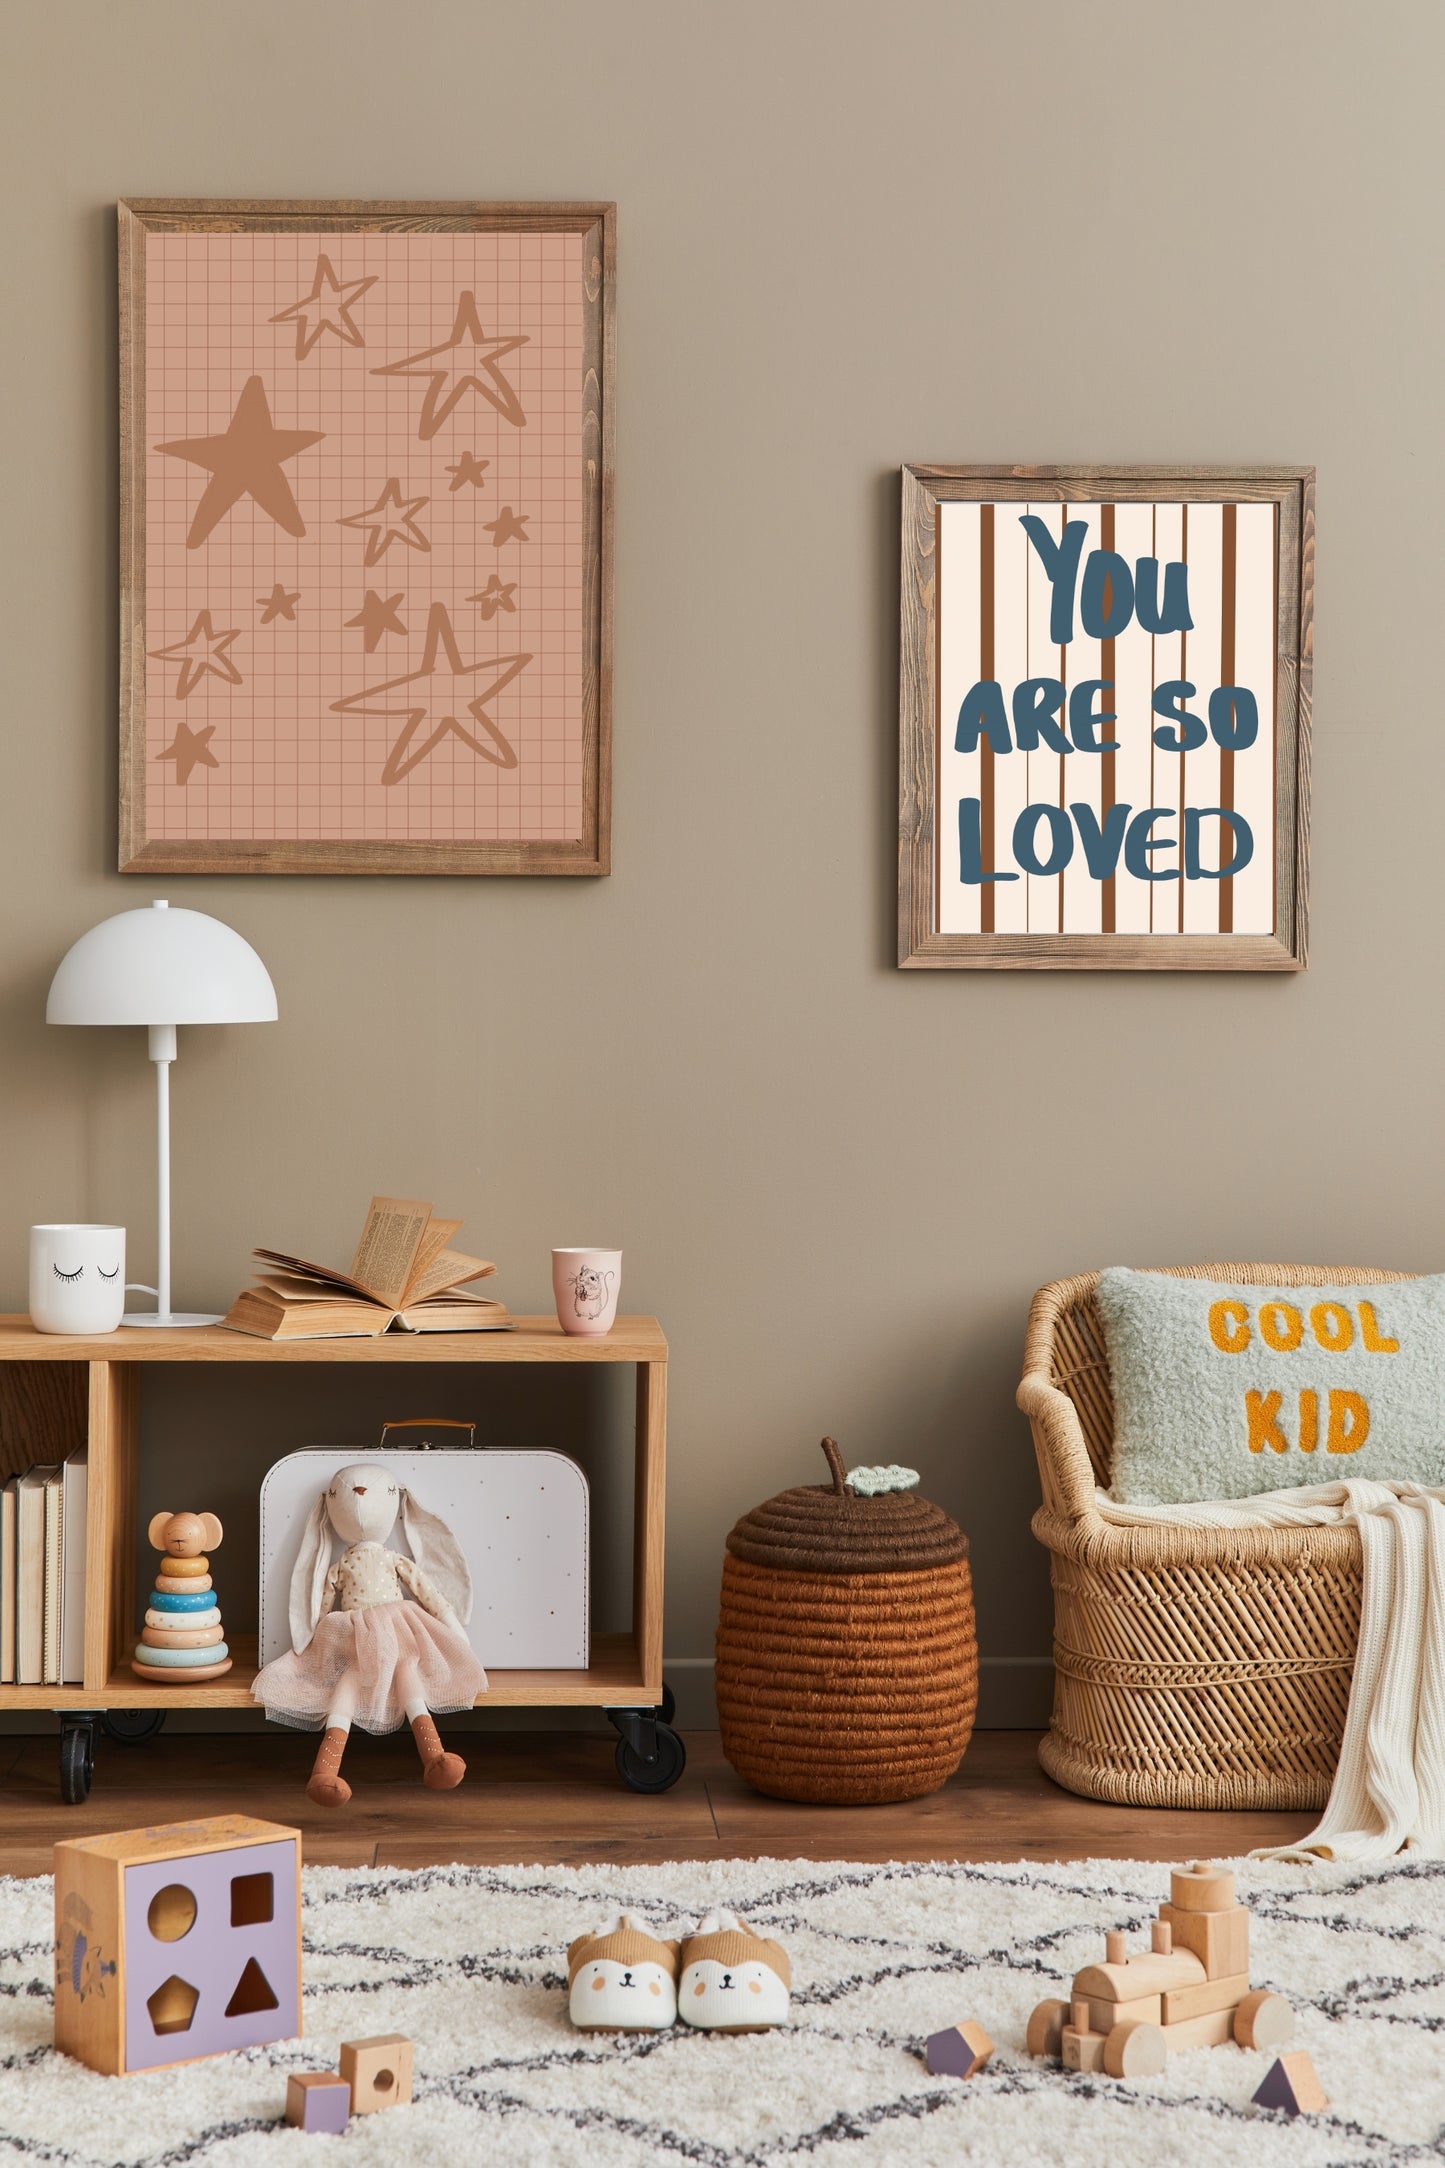 You are so loved - nursery poster